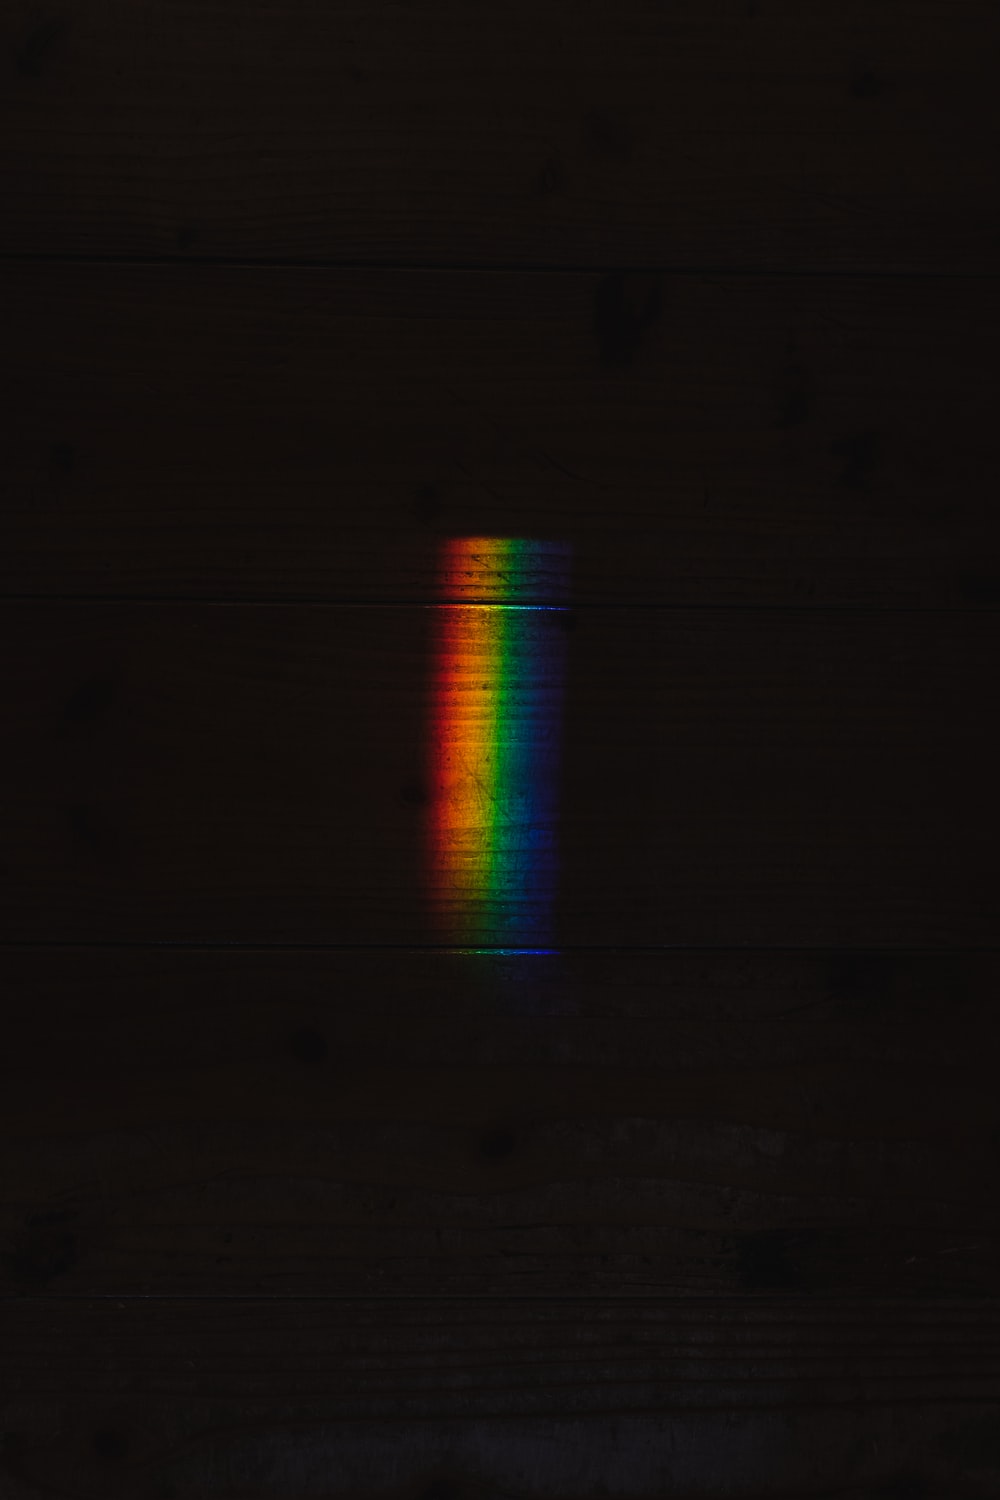 Rainbow Light Picture. Download Free Image